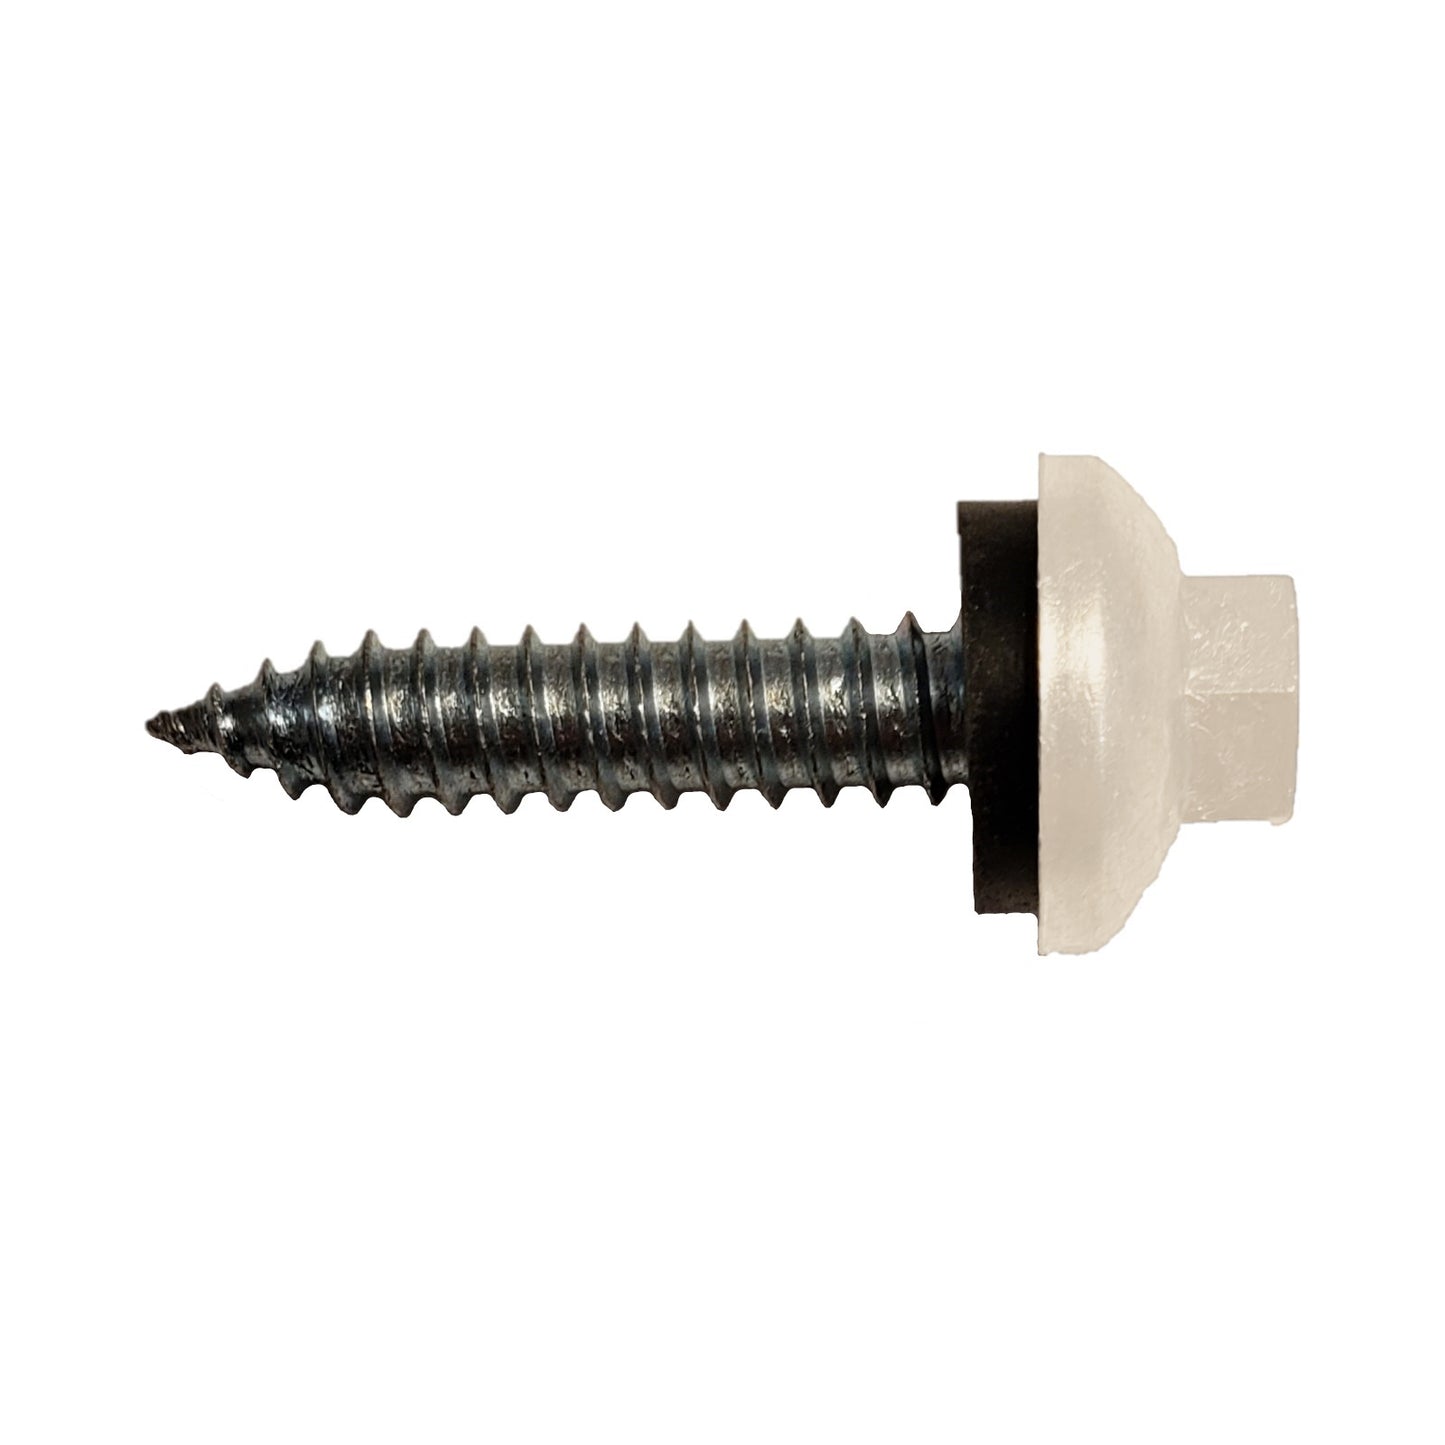 #14 x 114 inch ZXL Tapping Steelbinder Metal Roofing Screw Light Stone Pkg 250